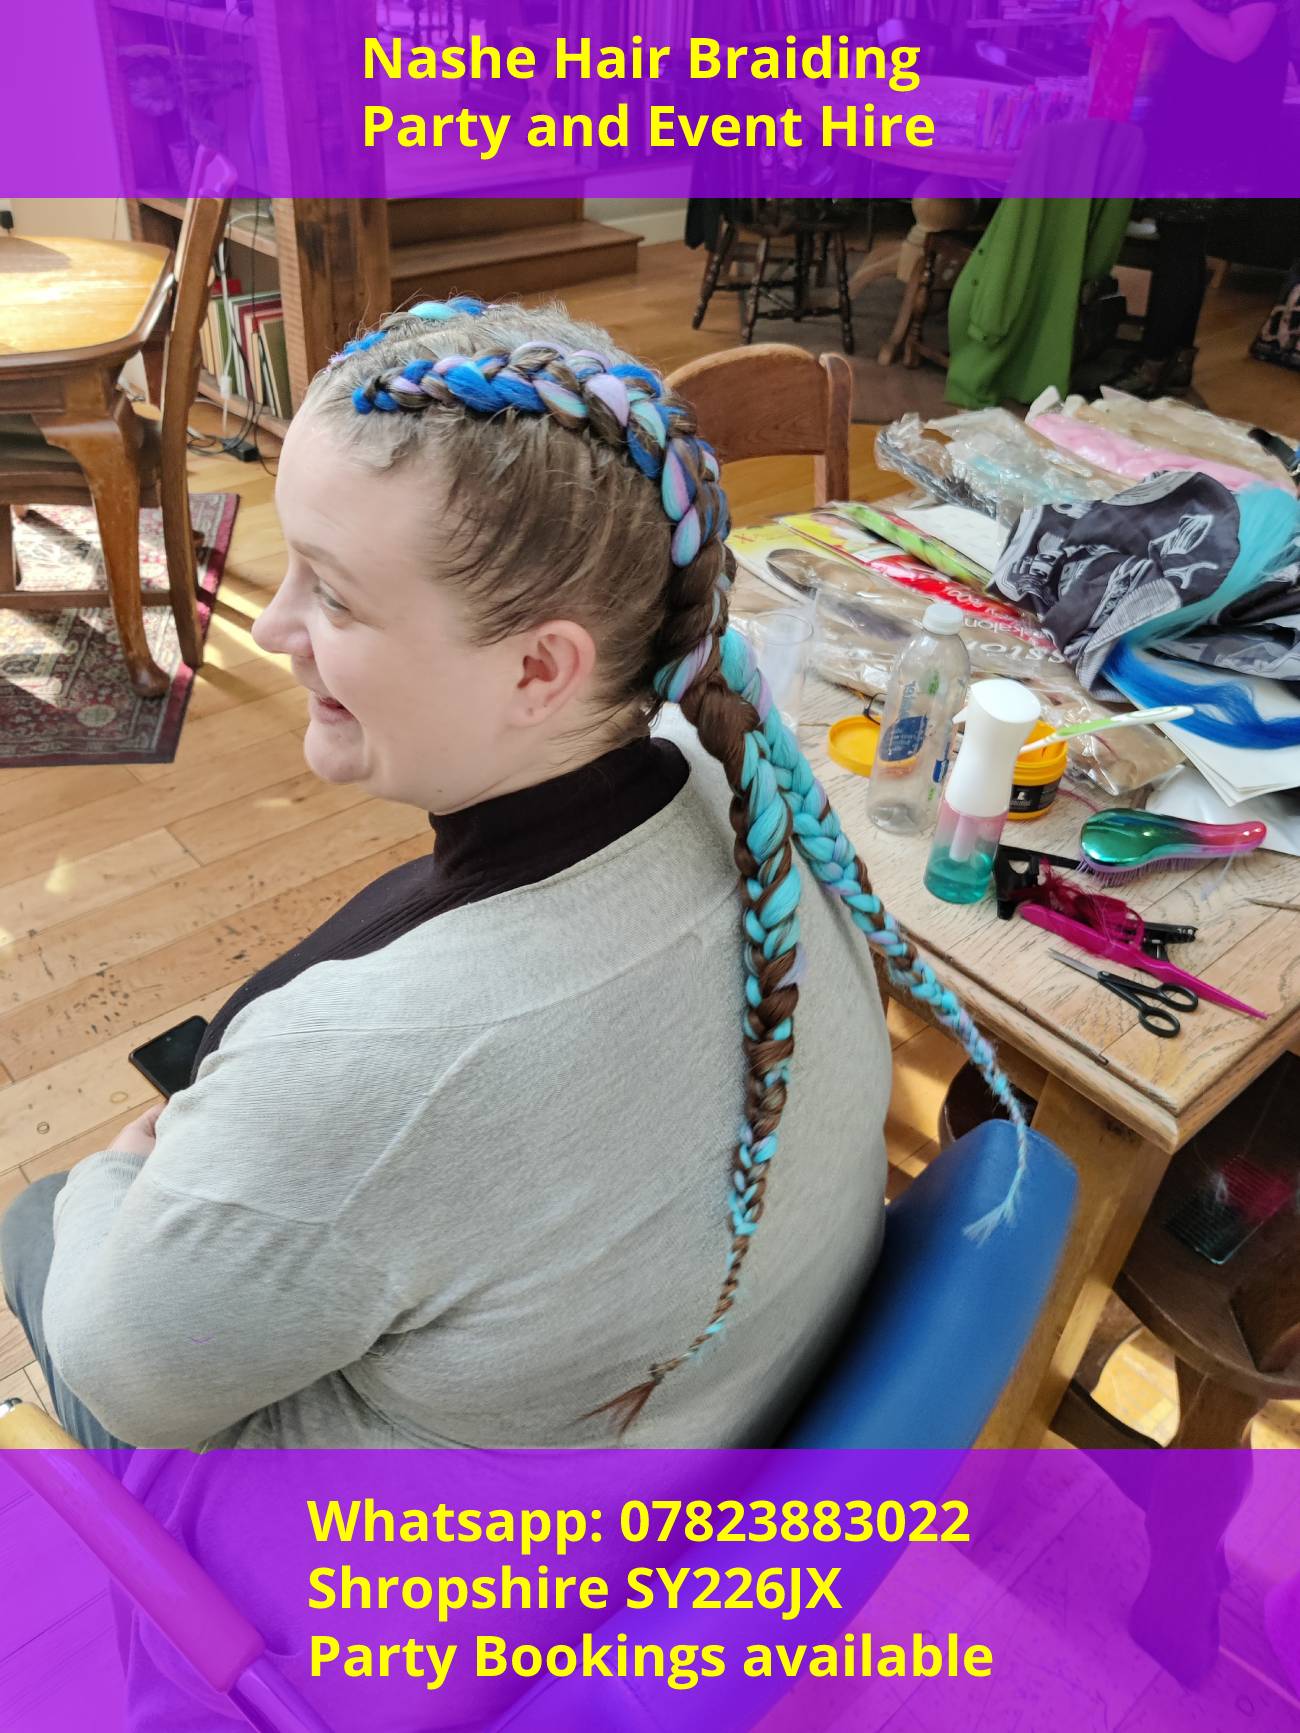 Party hire where i will attend your party and braid everyones hair